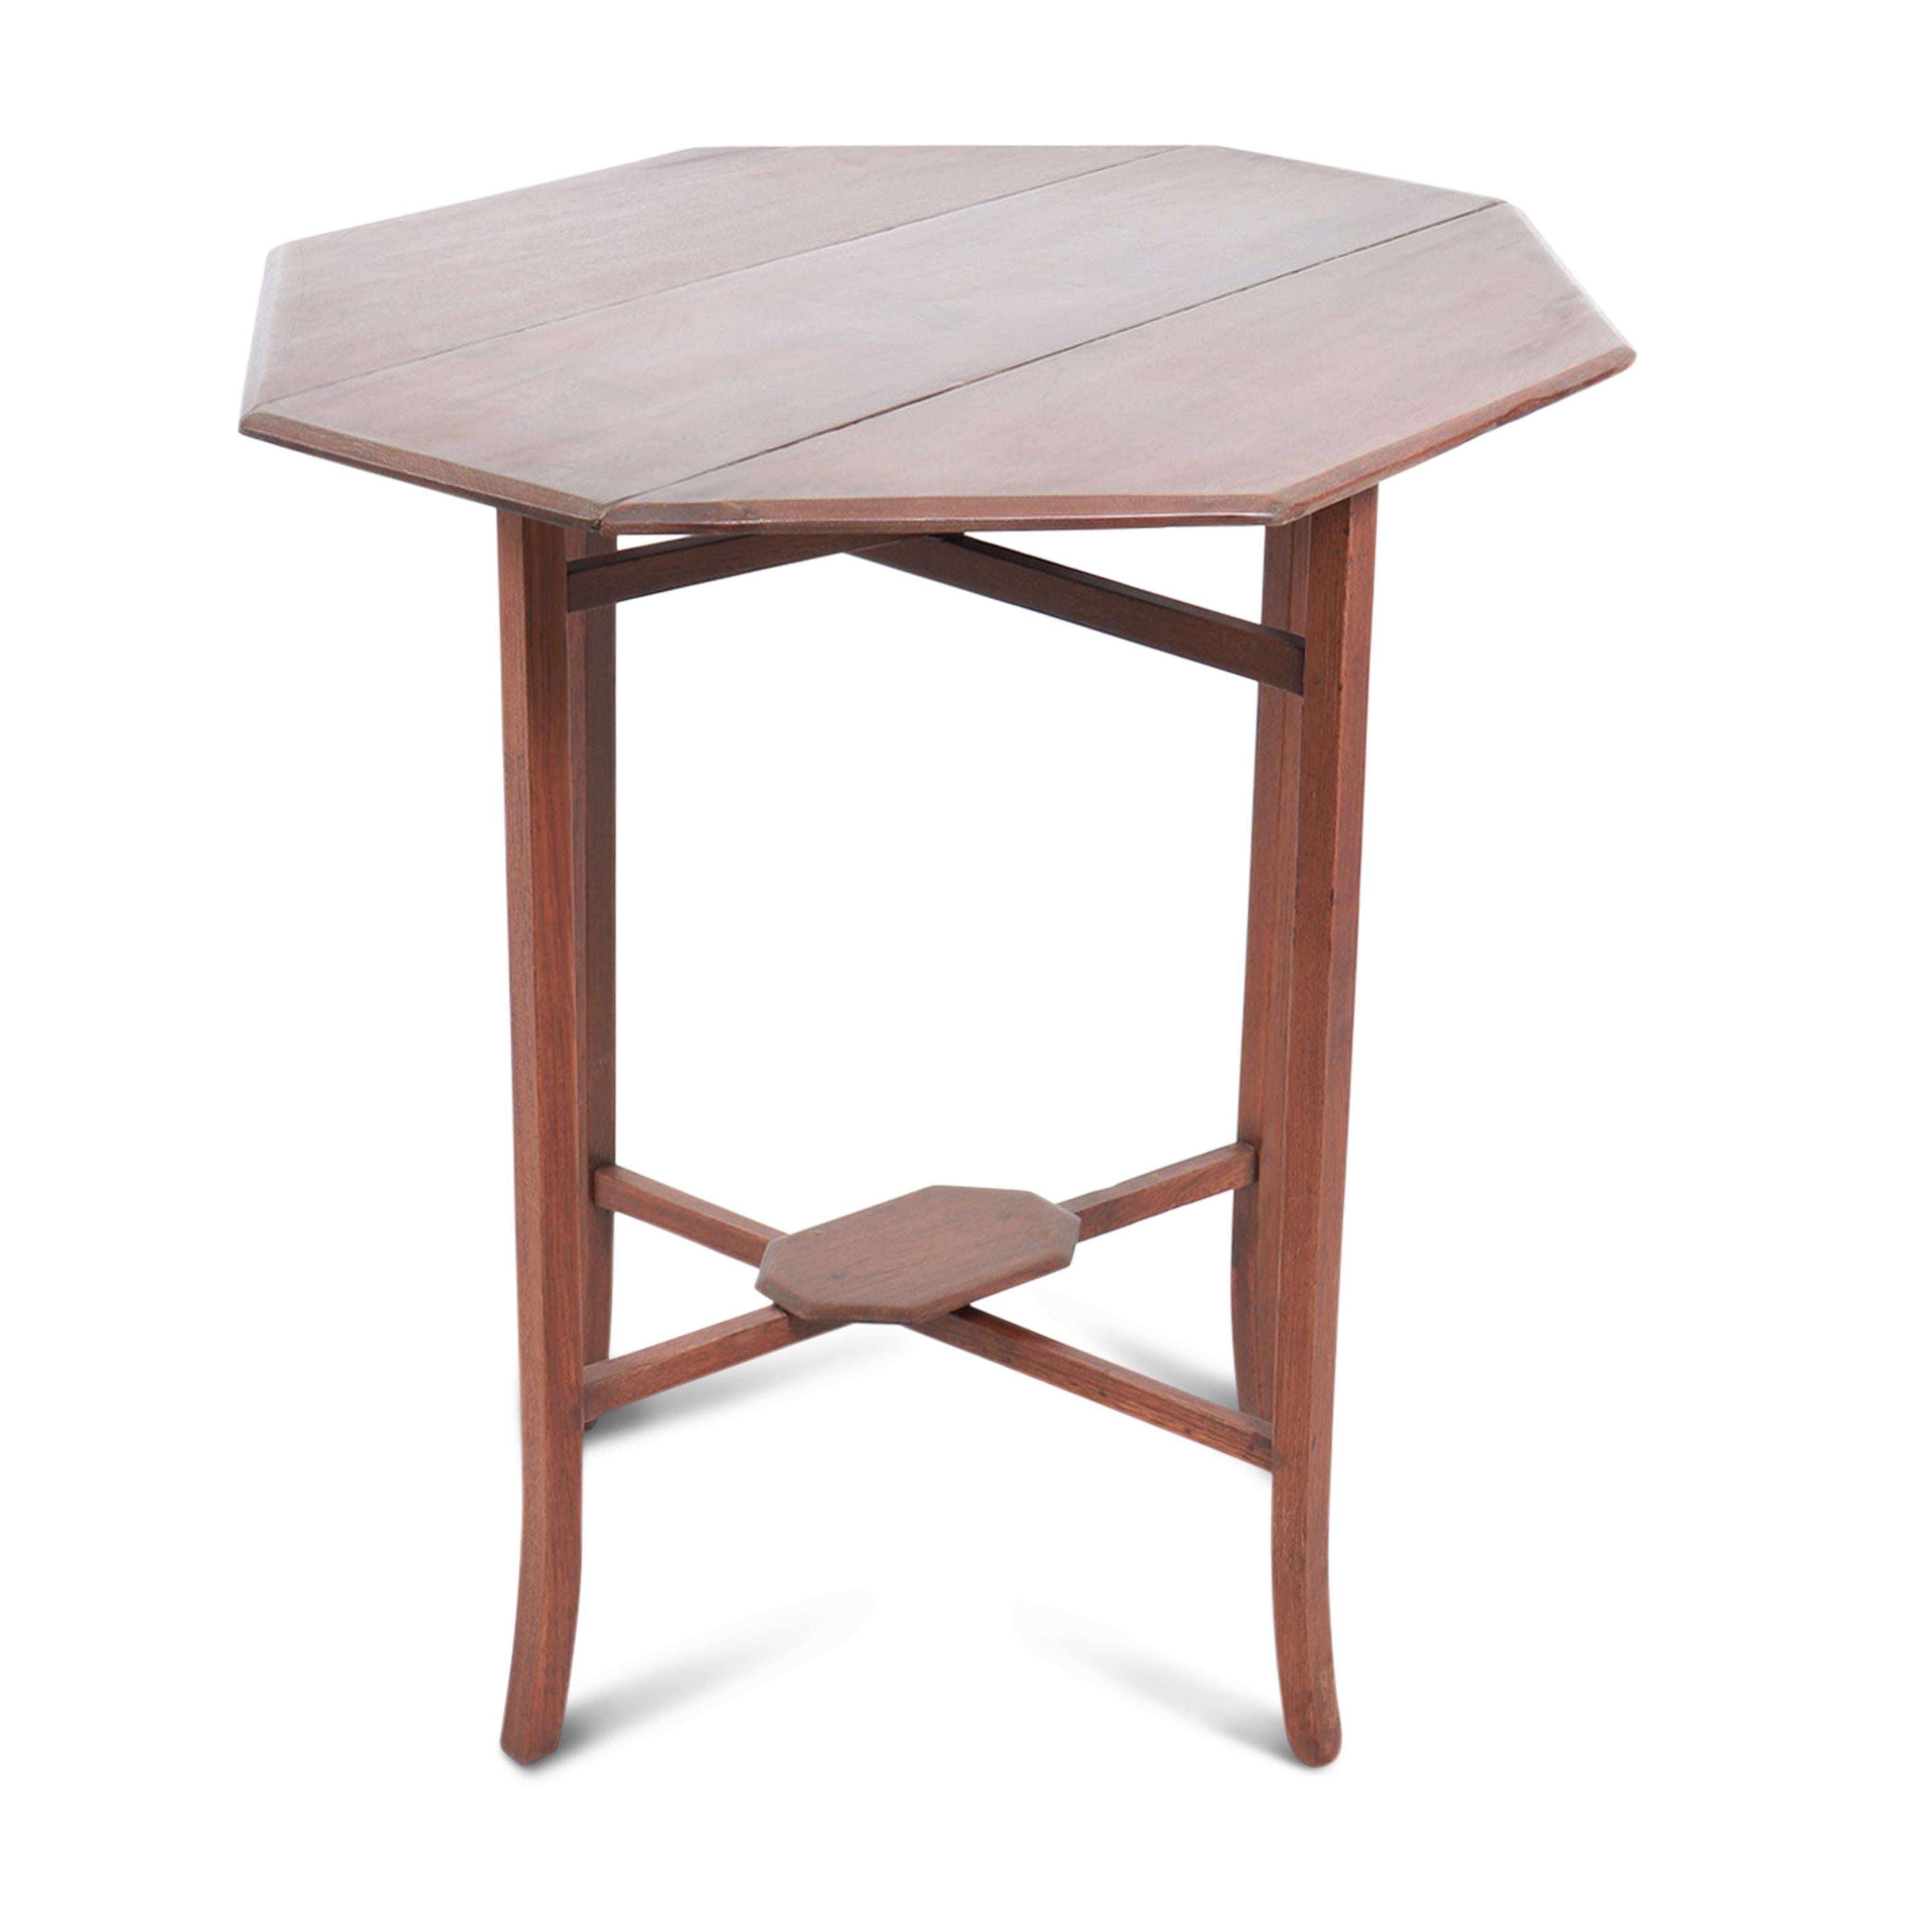 A teak folding table, featuring a minimalistic design with clean lines. This charming and versatile piece combines functionality and quality. 